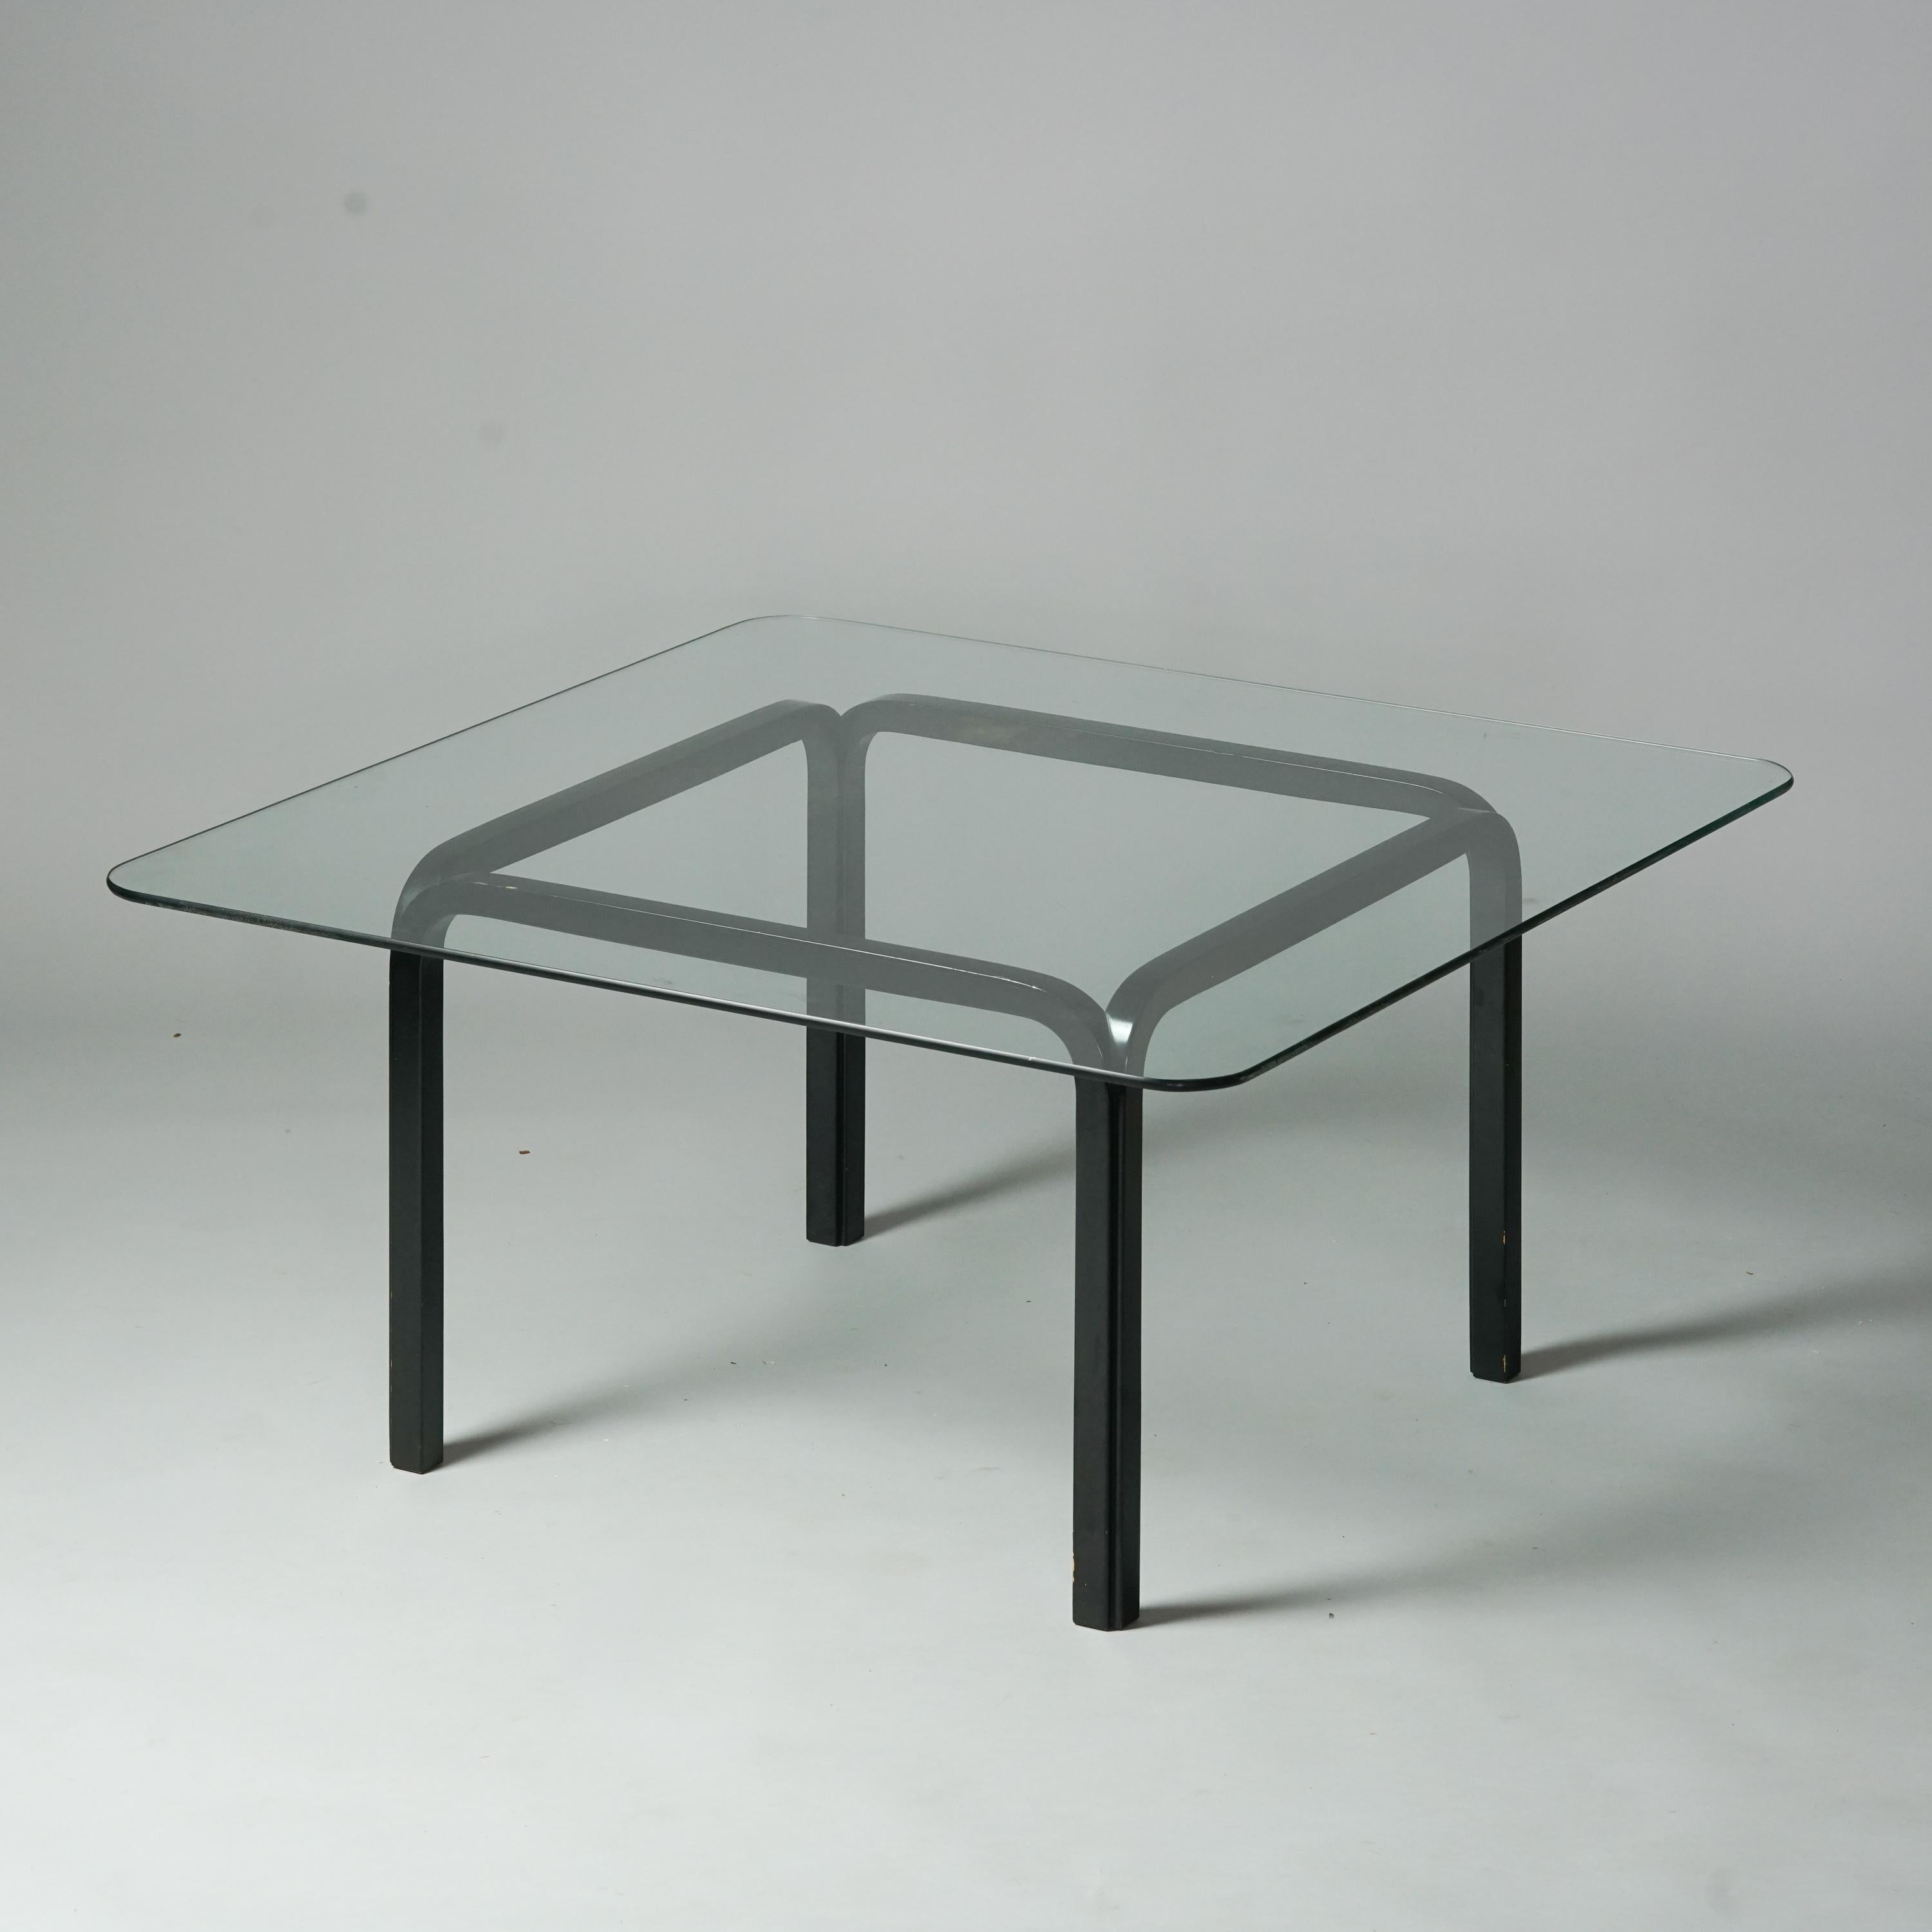 Model Y805B glass coffee table, designed by Alvar Aalto, manufactured by Artek, 1970s. Y805B painted birch frame with later added glass top. Good vintage condition, minor patina consistent with age and use. 

Alvar Aalto (1898-1976) is probably the